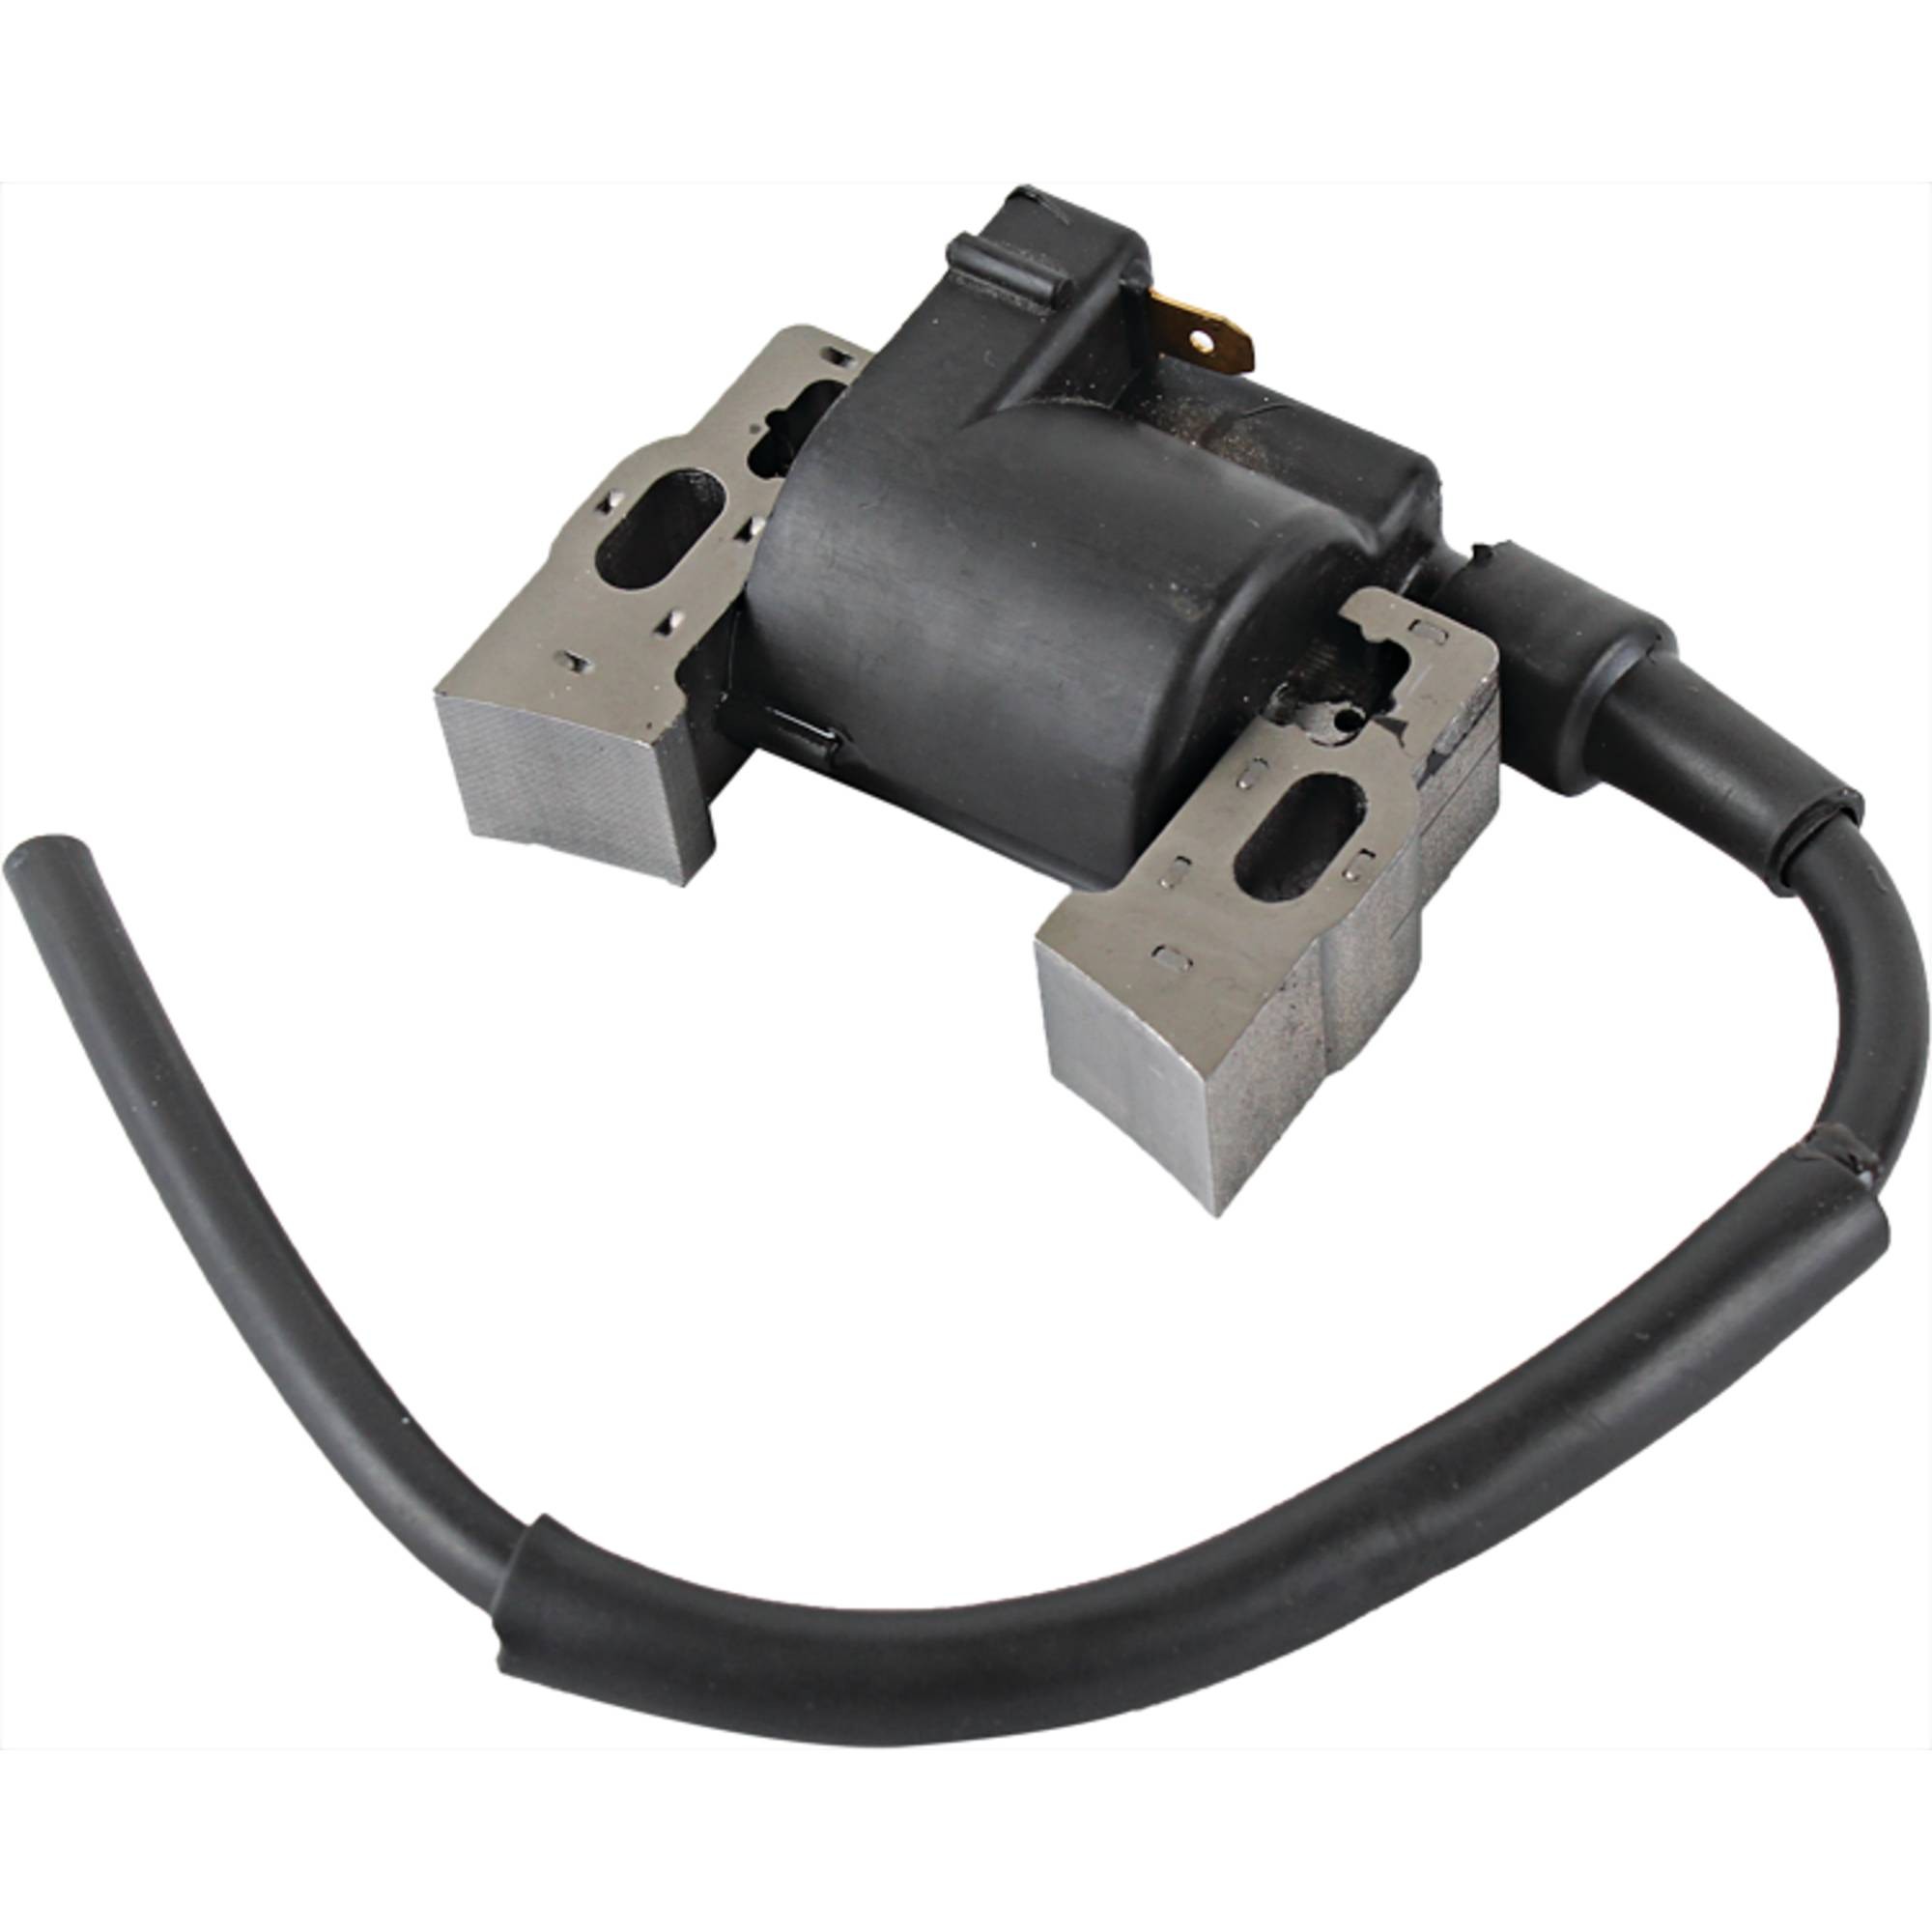 Ignition Coil Right Side - Honda Gx610, Gx620 And Gx670 V Twin 